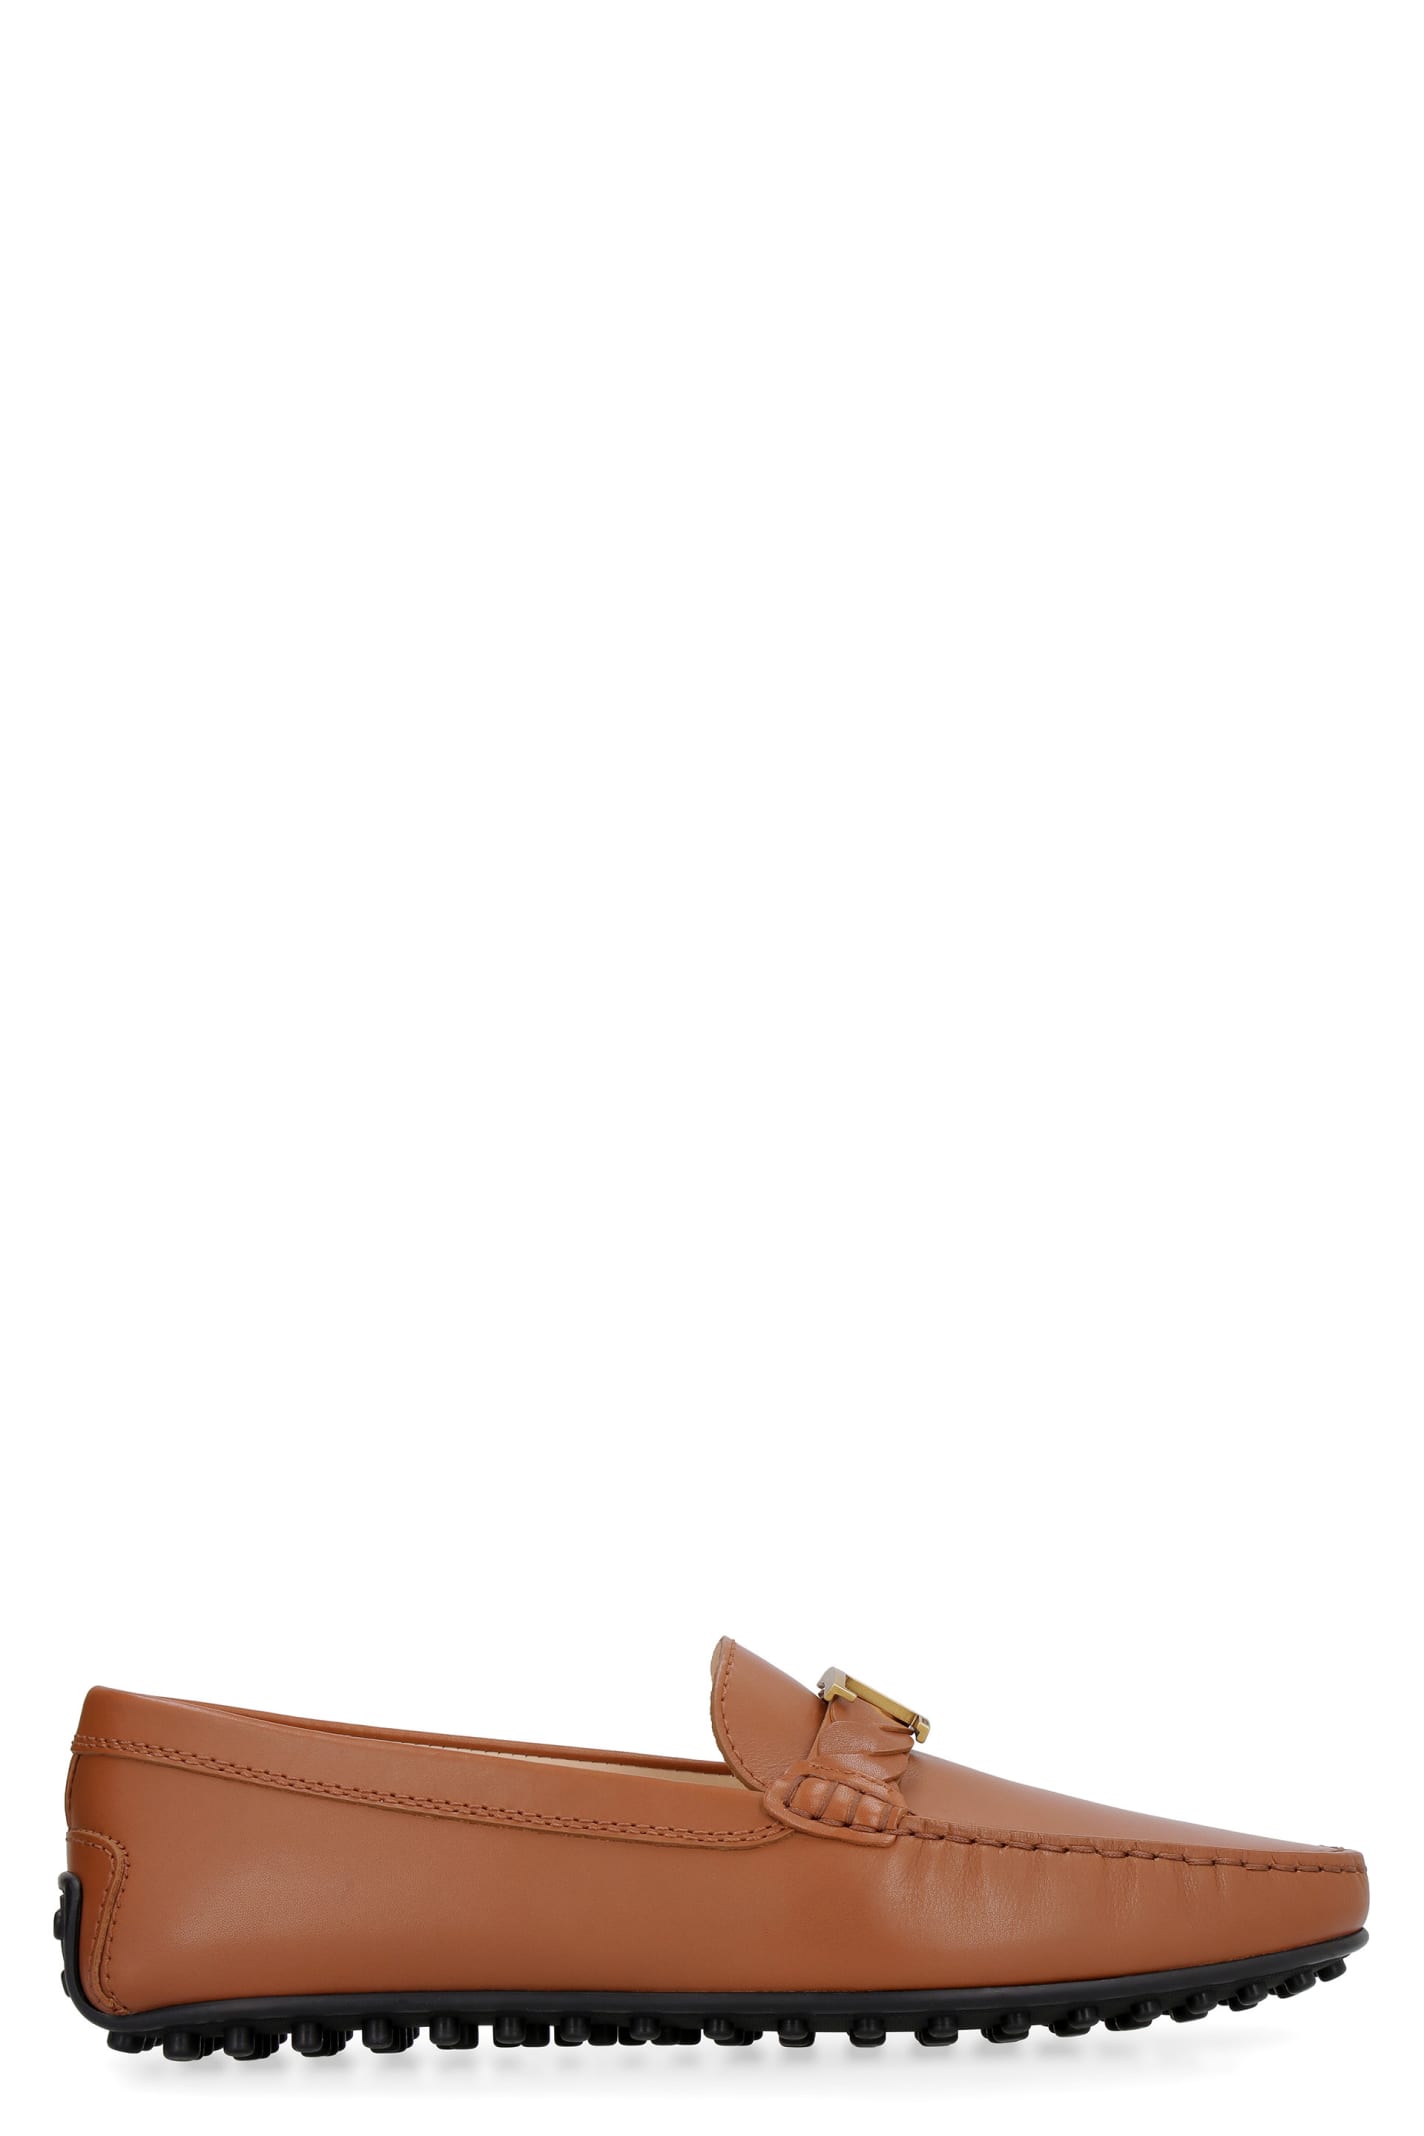 Buy Tods City Gommino Leather Loafers online, shop Tods shoes with free shipping